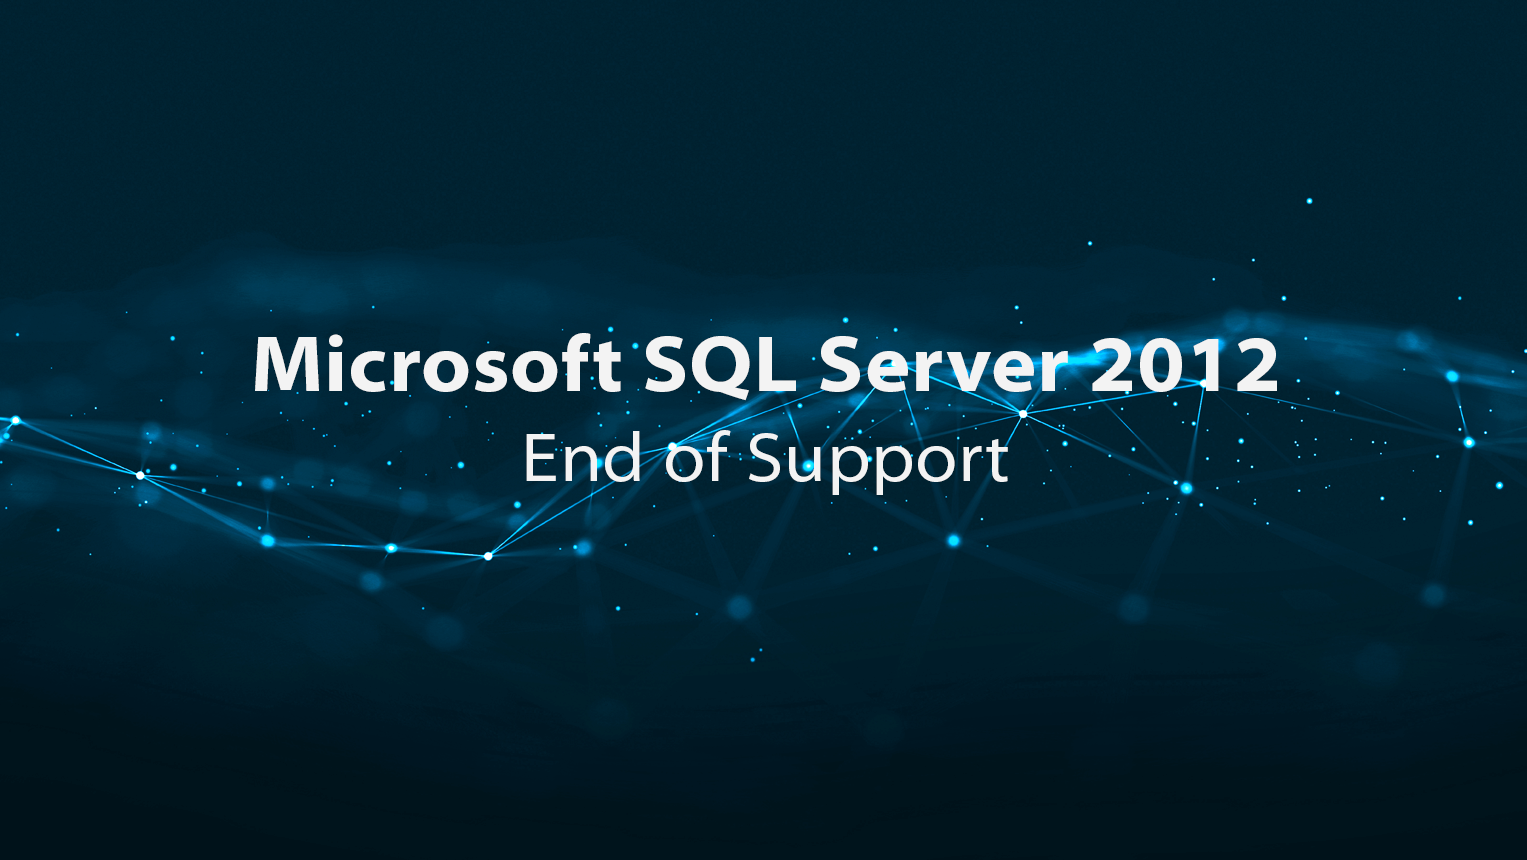 SQL 2012 is being phased out